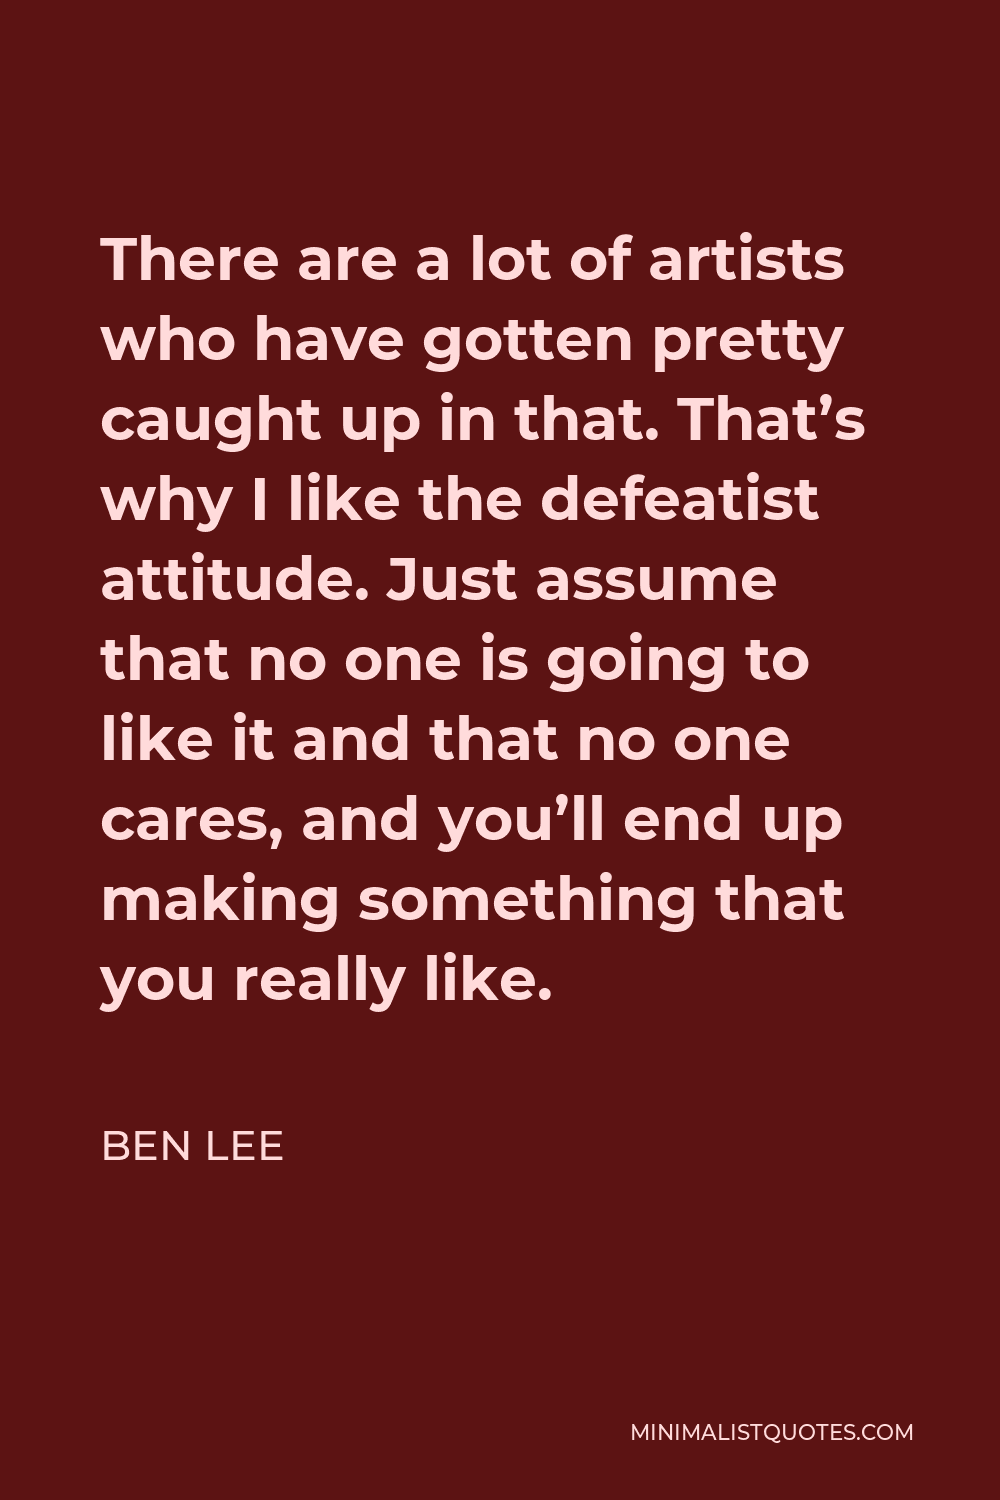 Ben Lee Quote - There are a lot of artists who have gotten pretty caught up in that. That’s why I like the defeatist attitude. Just assume that no one is going to like it and that no one cares, and you’ll end up making something that you really like.